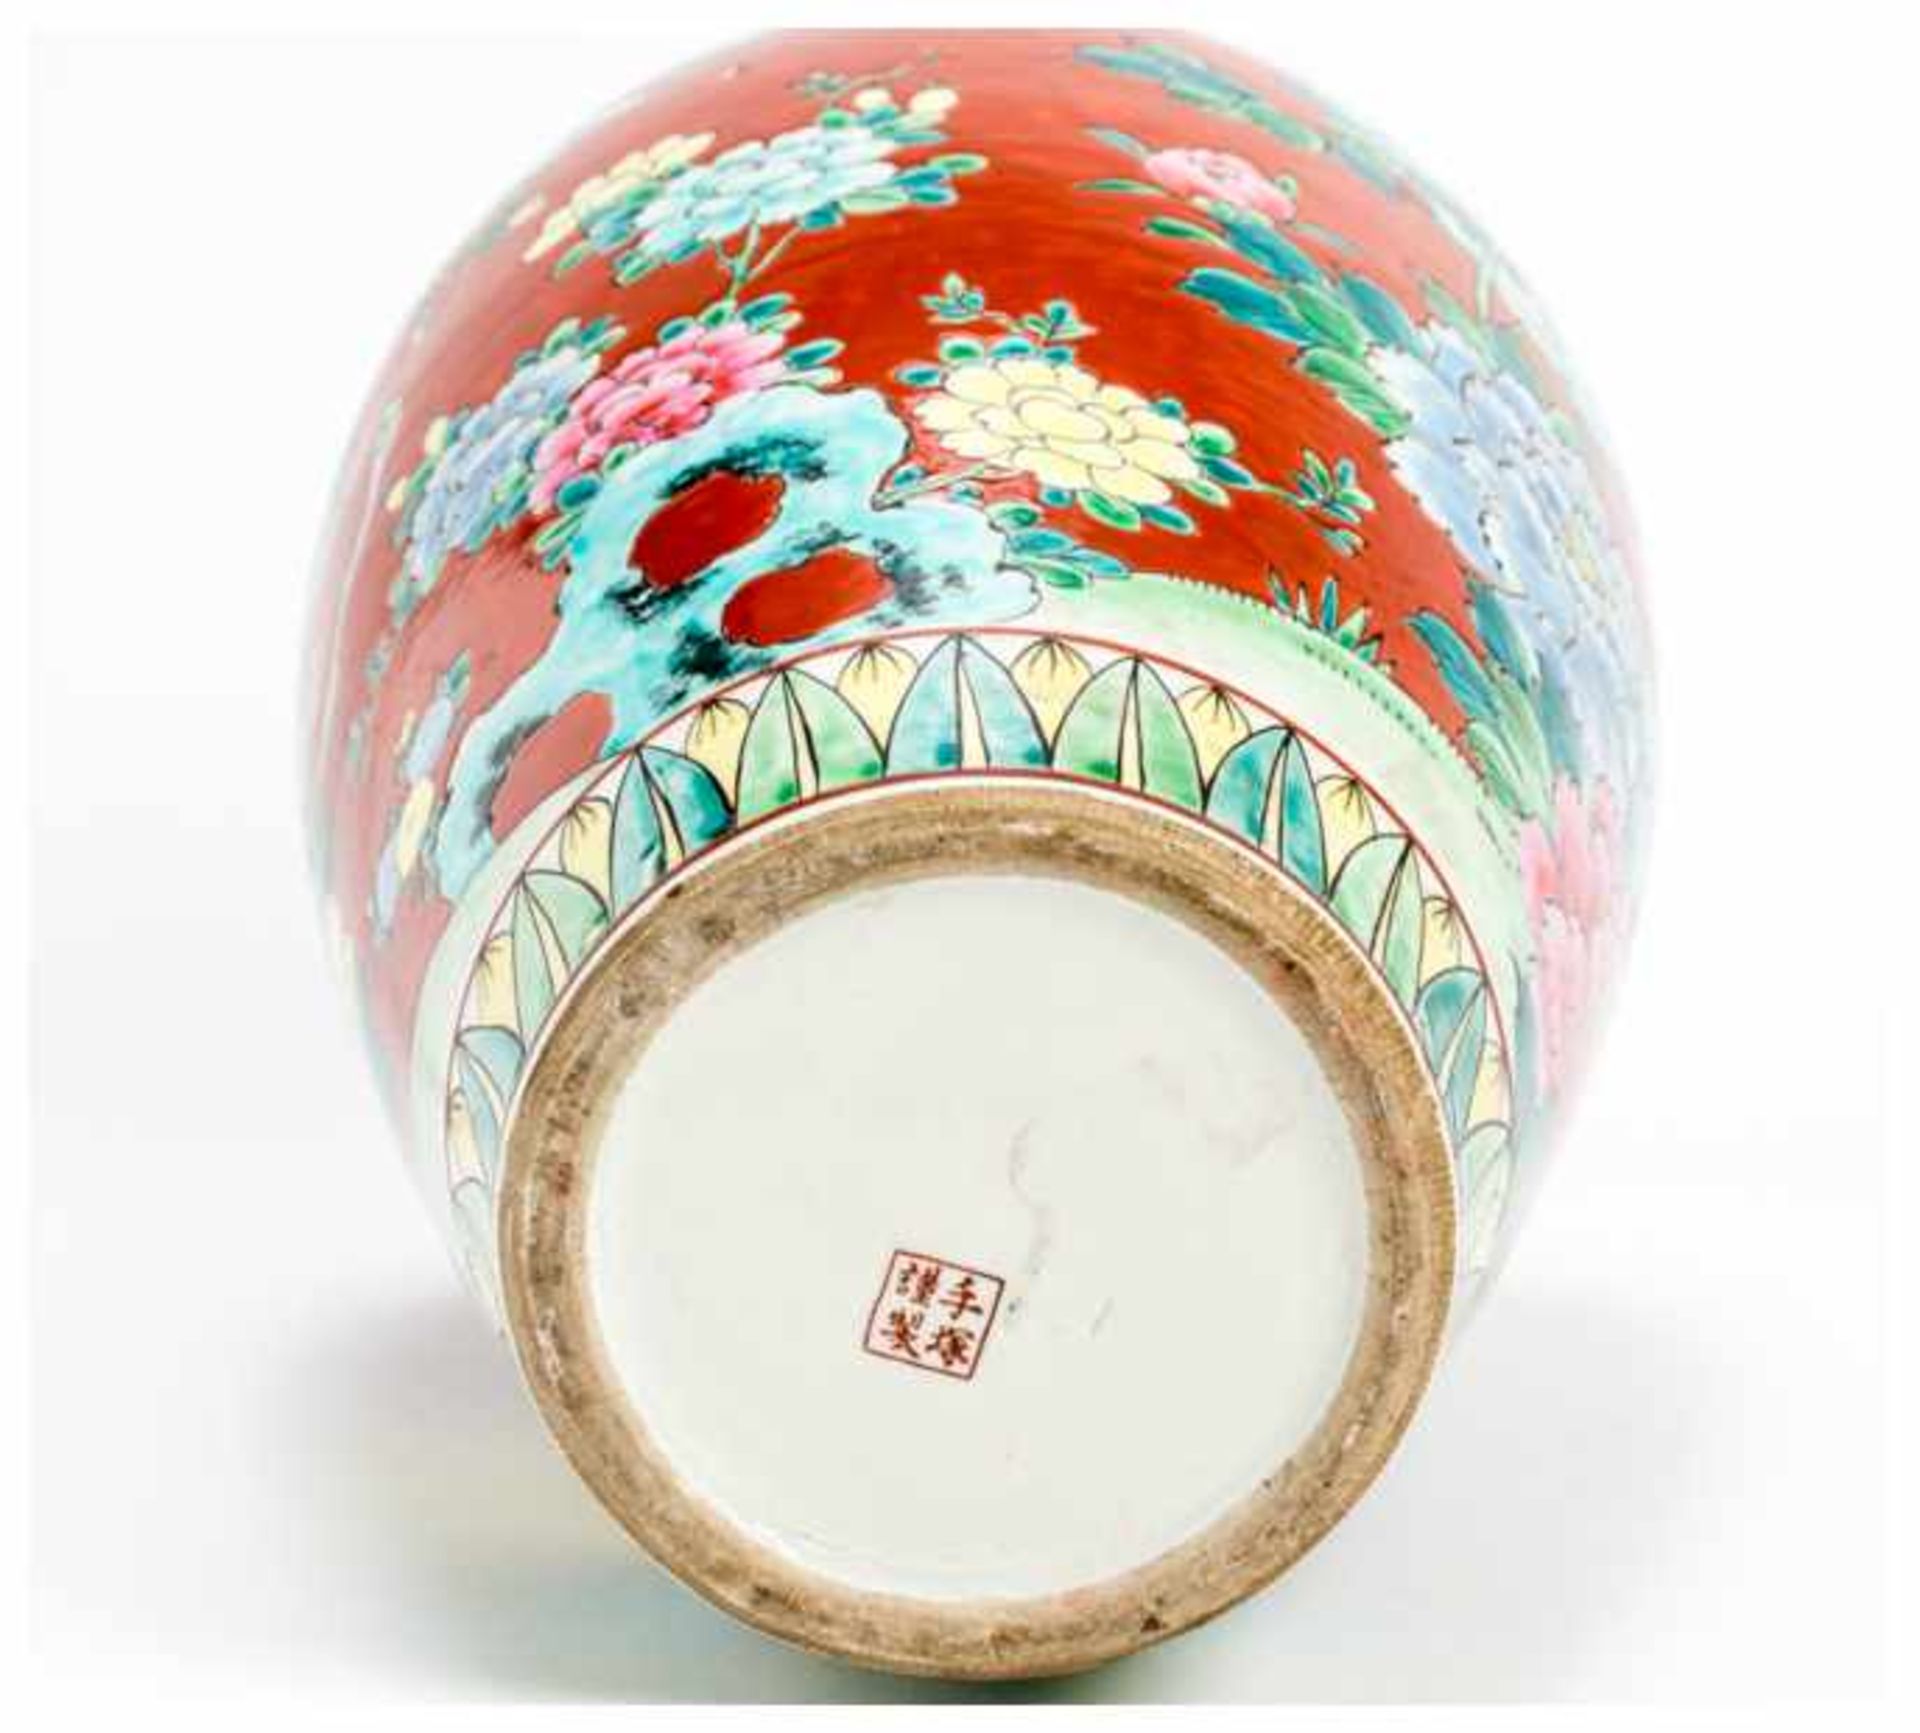 A POLYCHROME PORCELAIN VASE Porcelain. China, Republic periodA baluster shaped vase in an attractive - Image 6 of 6